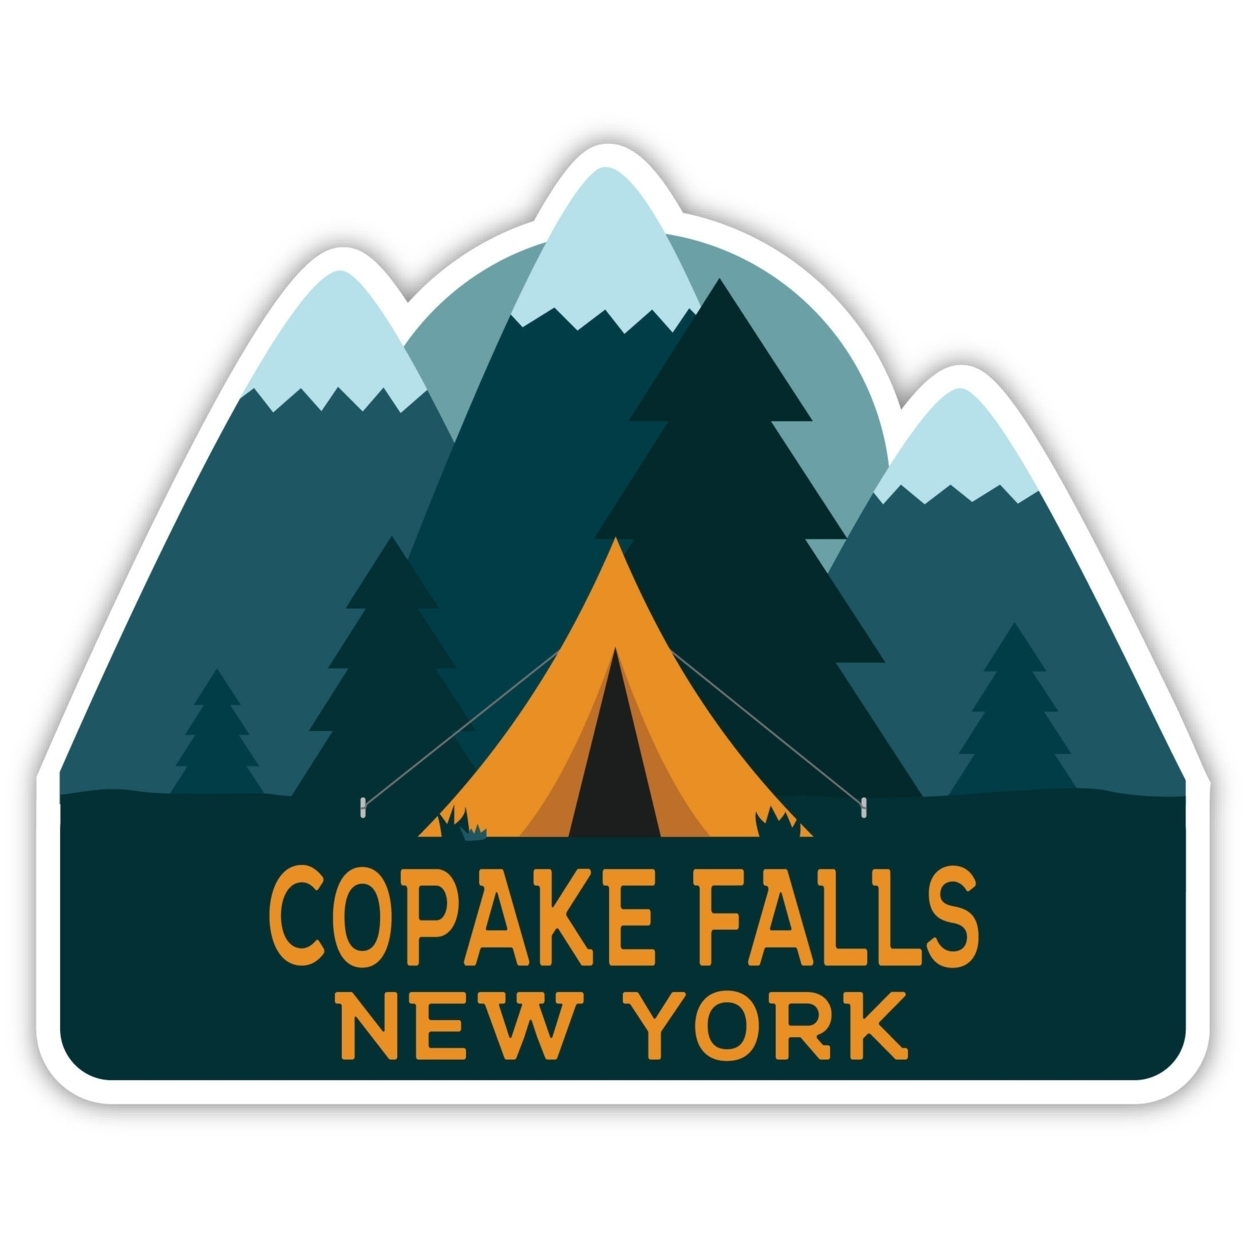 Copake Falls New York Souvenir Decorative Stickers (Choose Theme And Size) - 4-Pack, 12-Inch, Tent